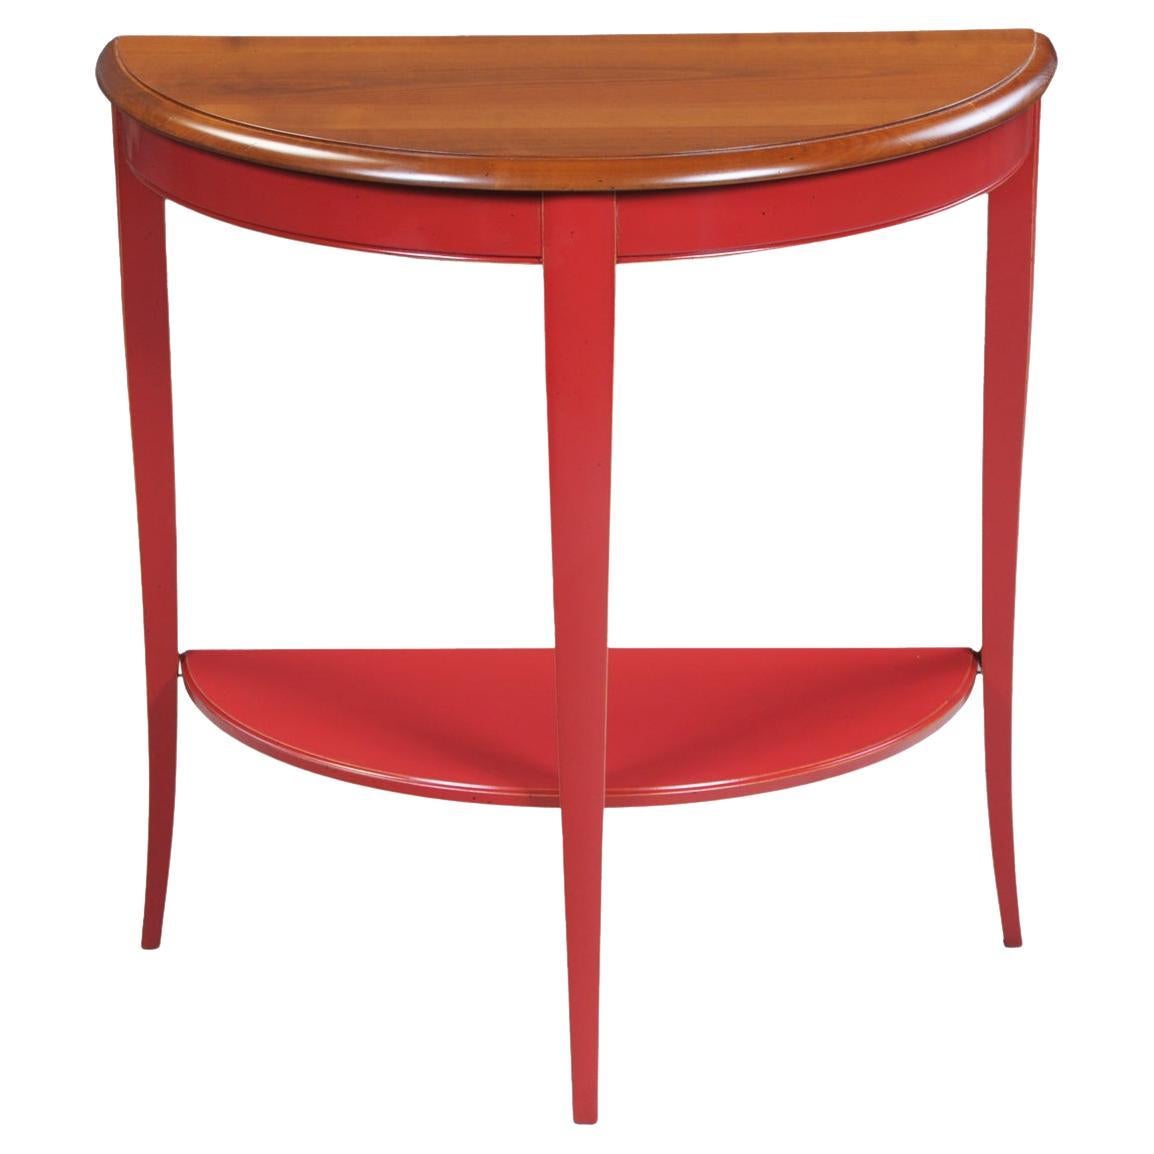 French provincial demi-lune console table in solid cherry,  poppy red lacquered